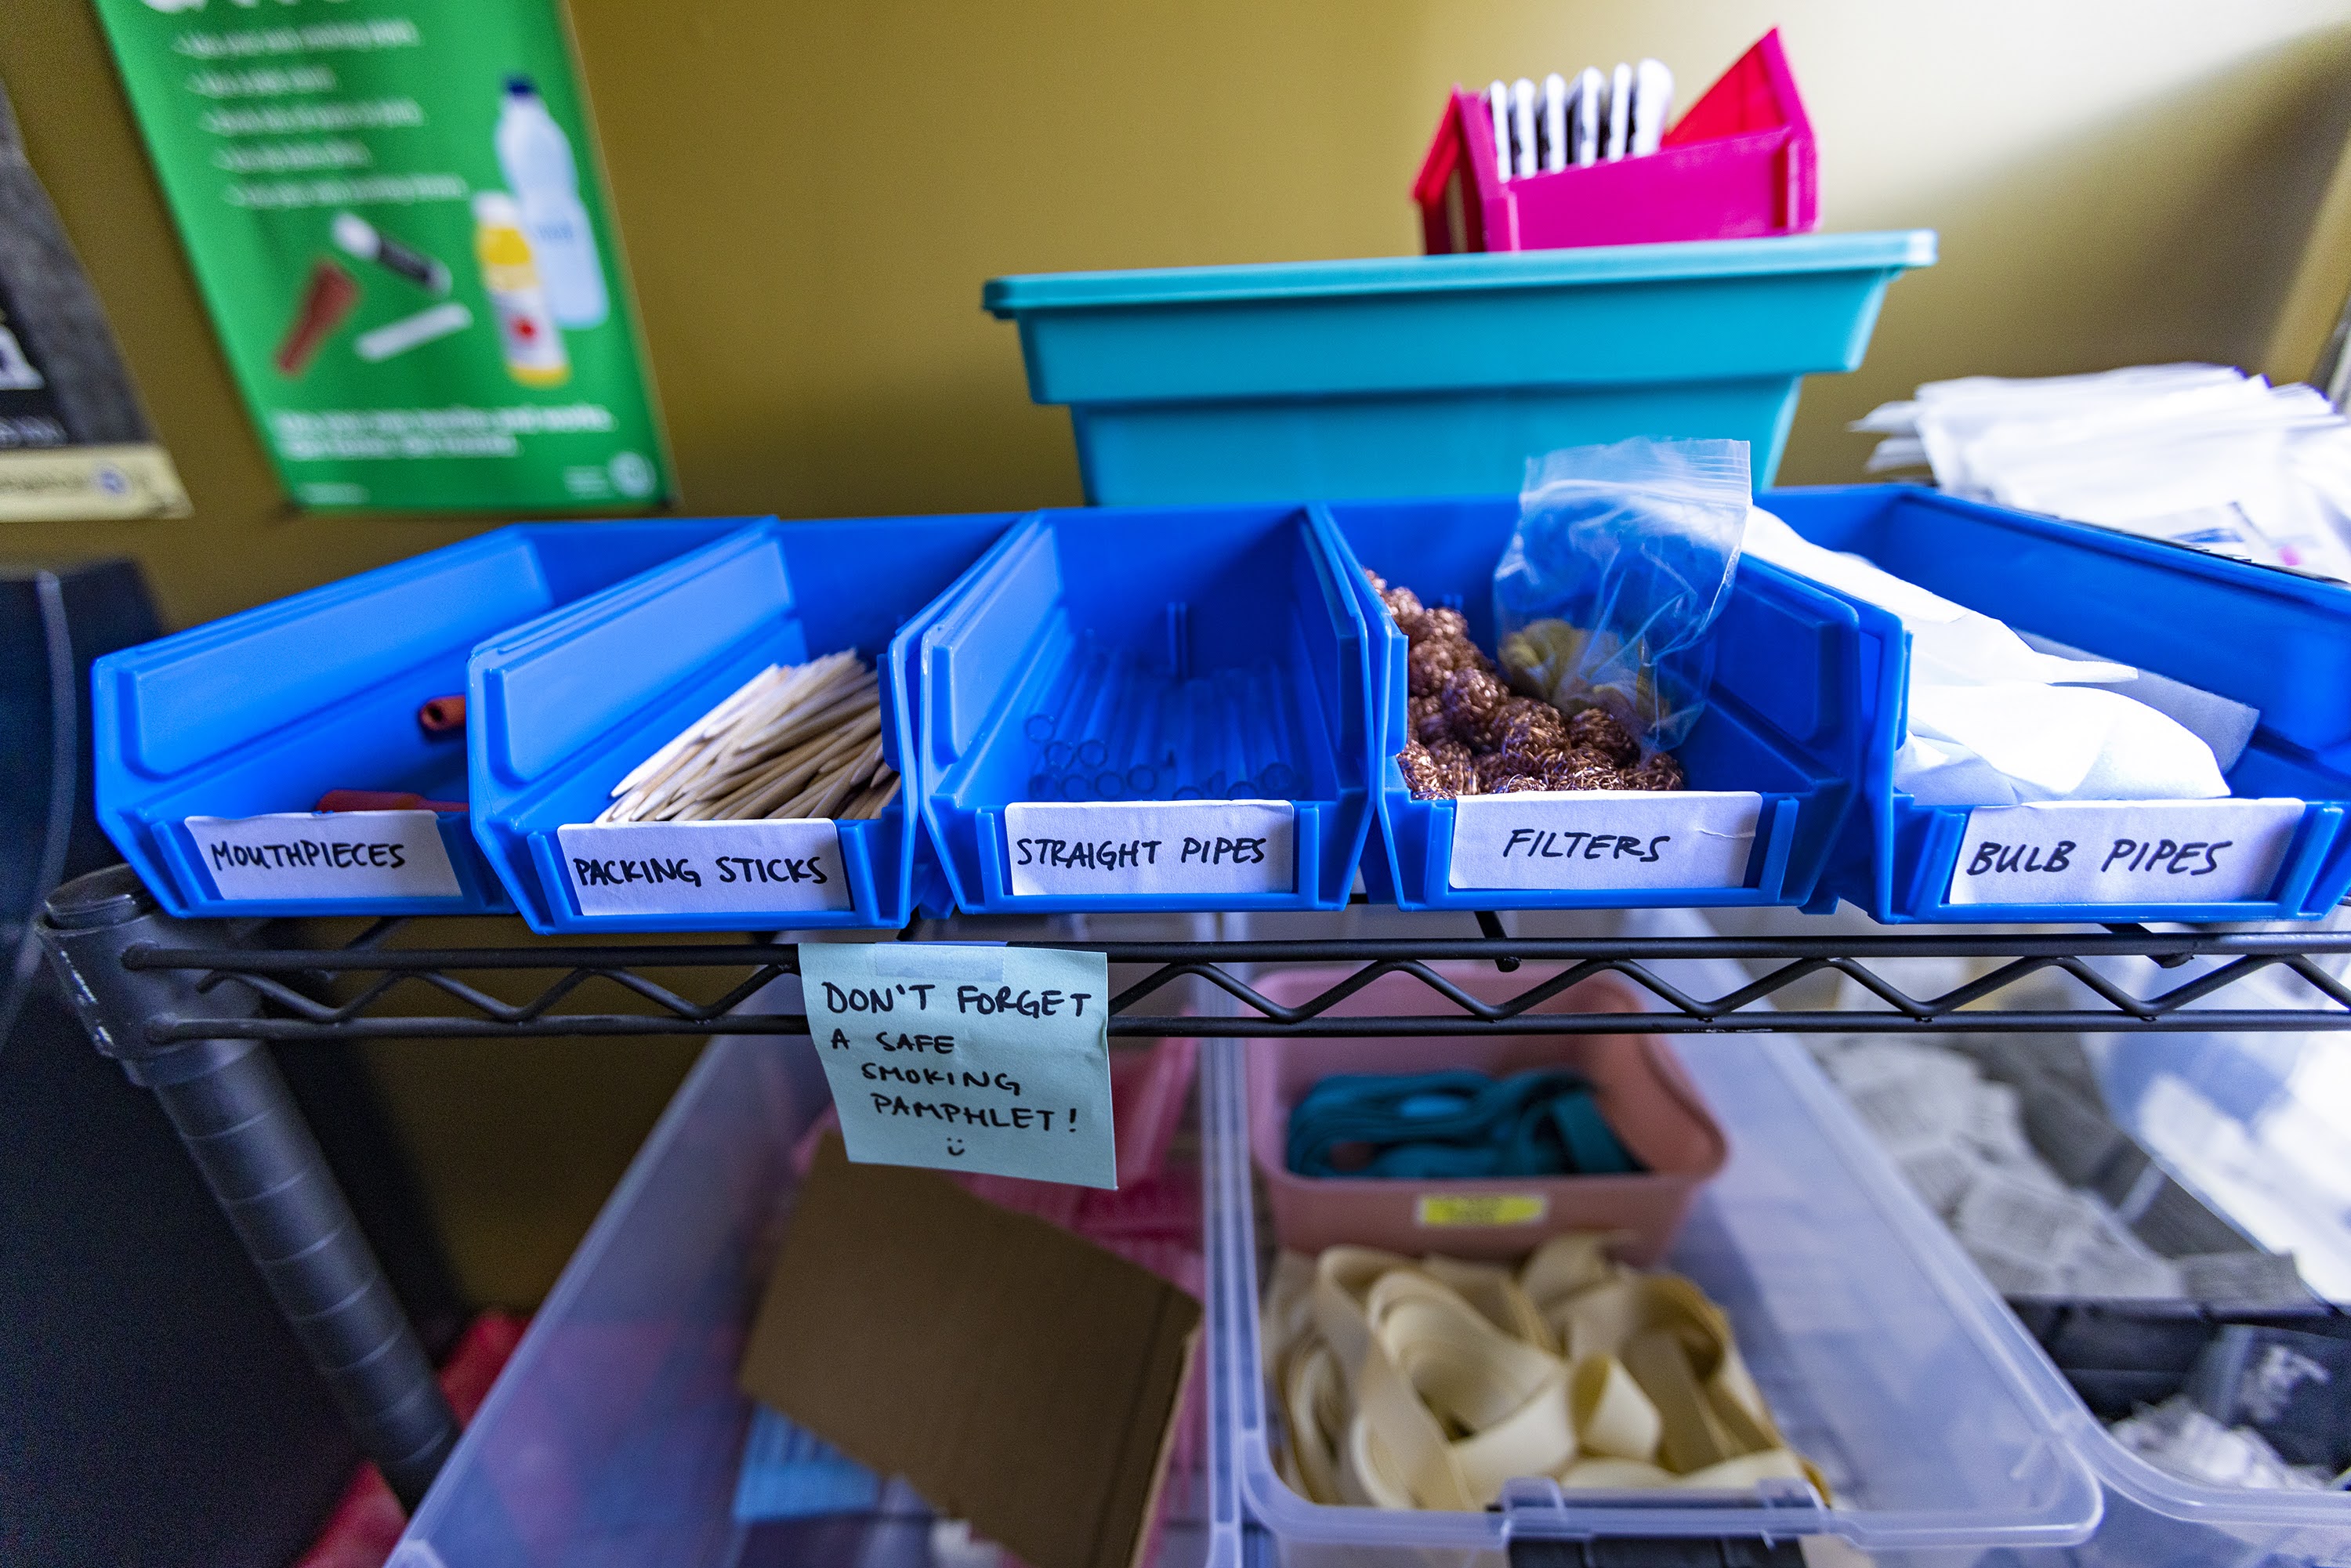 A photo shows trays of clean supplies for drug use.